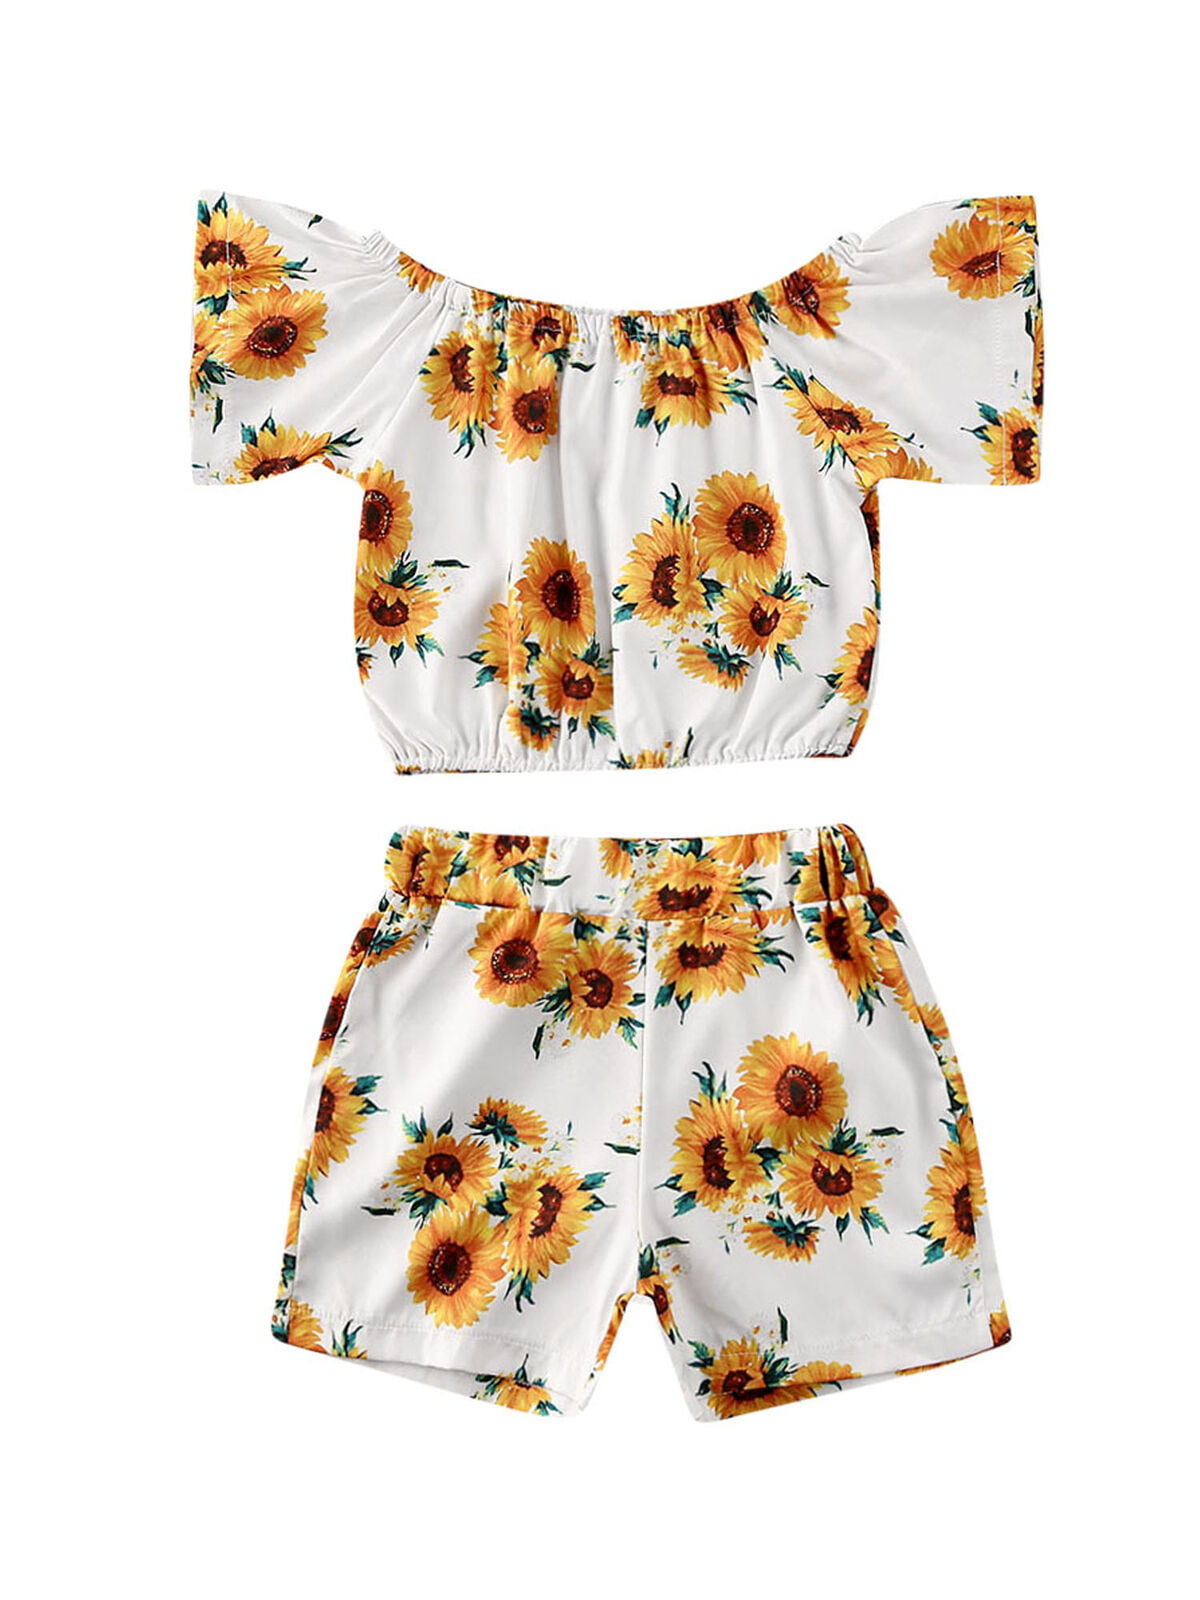 Details about   Toddler Kids Baby Girl Sunflower Print T-shirt Shorts Outfits Set Sports Clothes 